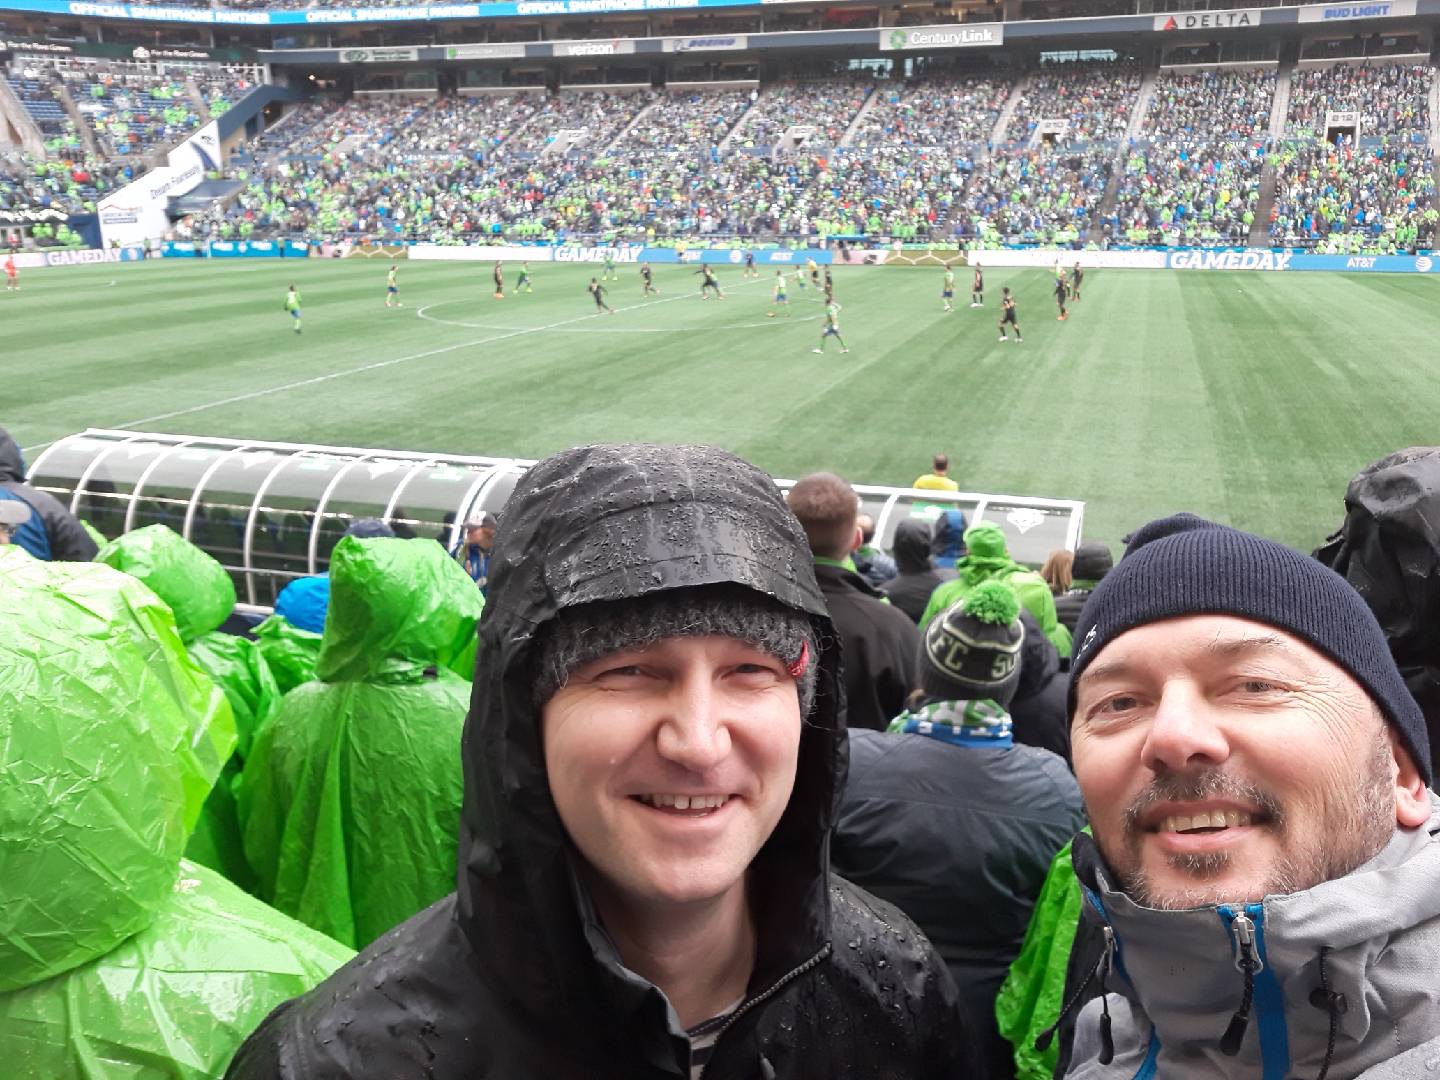 At the Sounders game